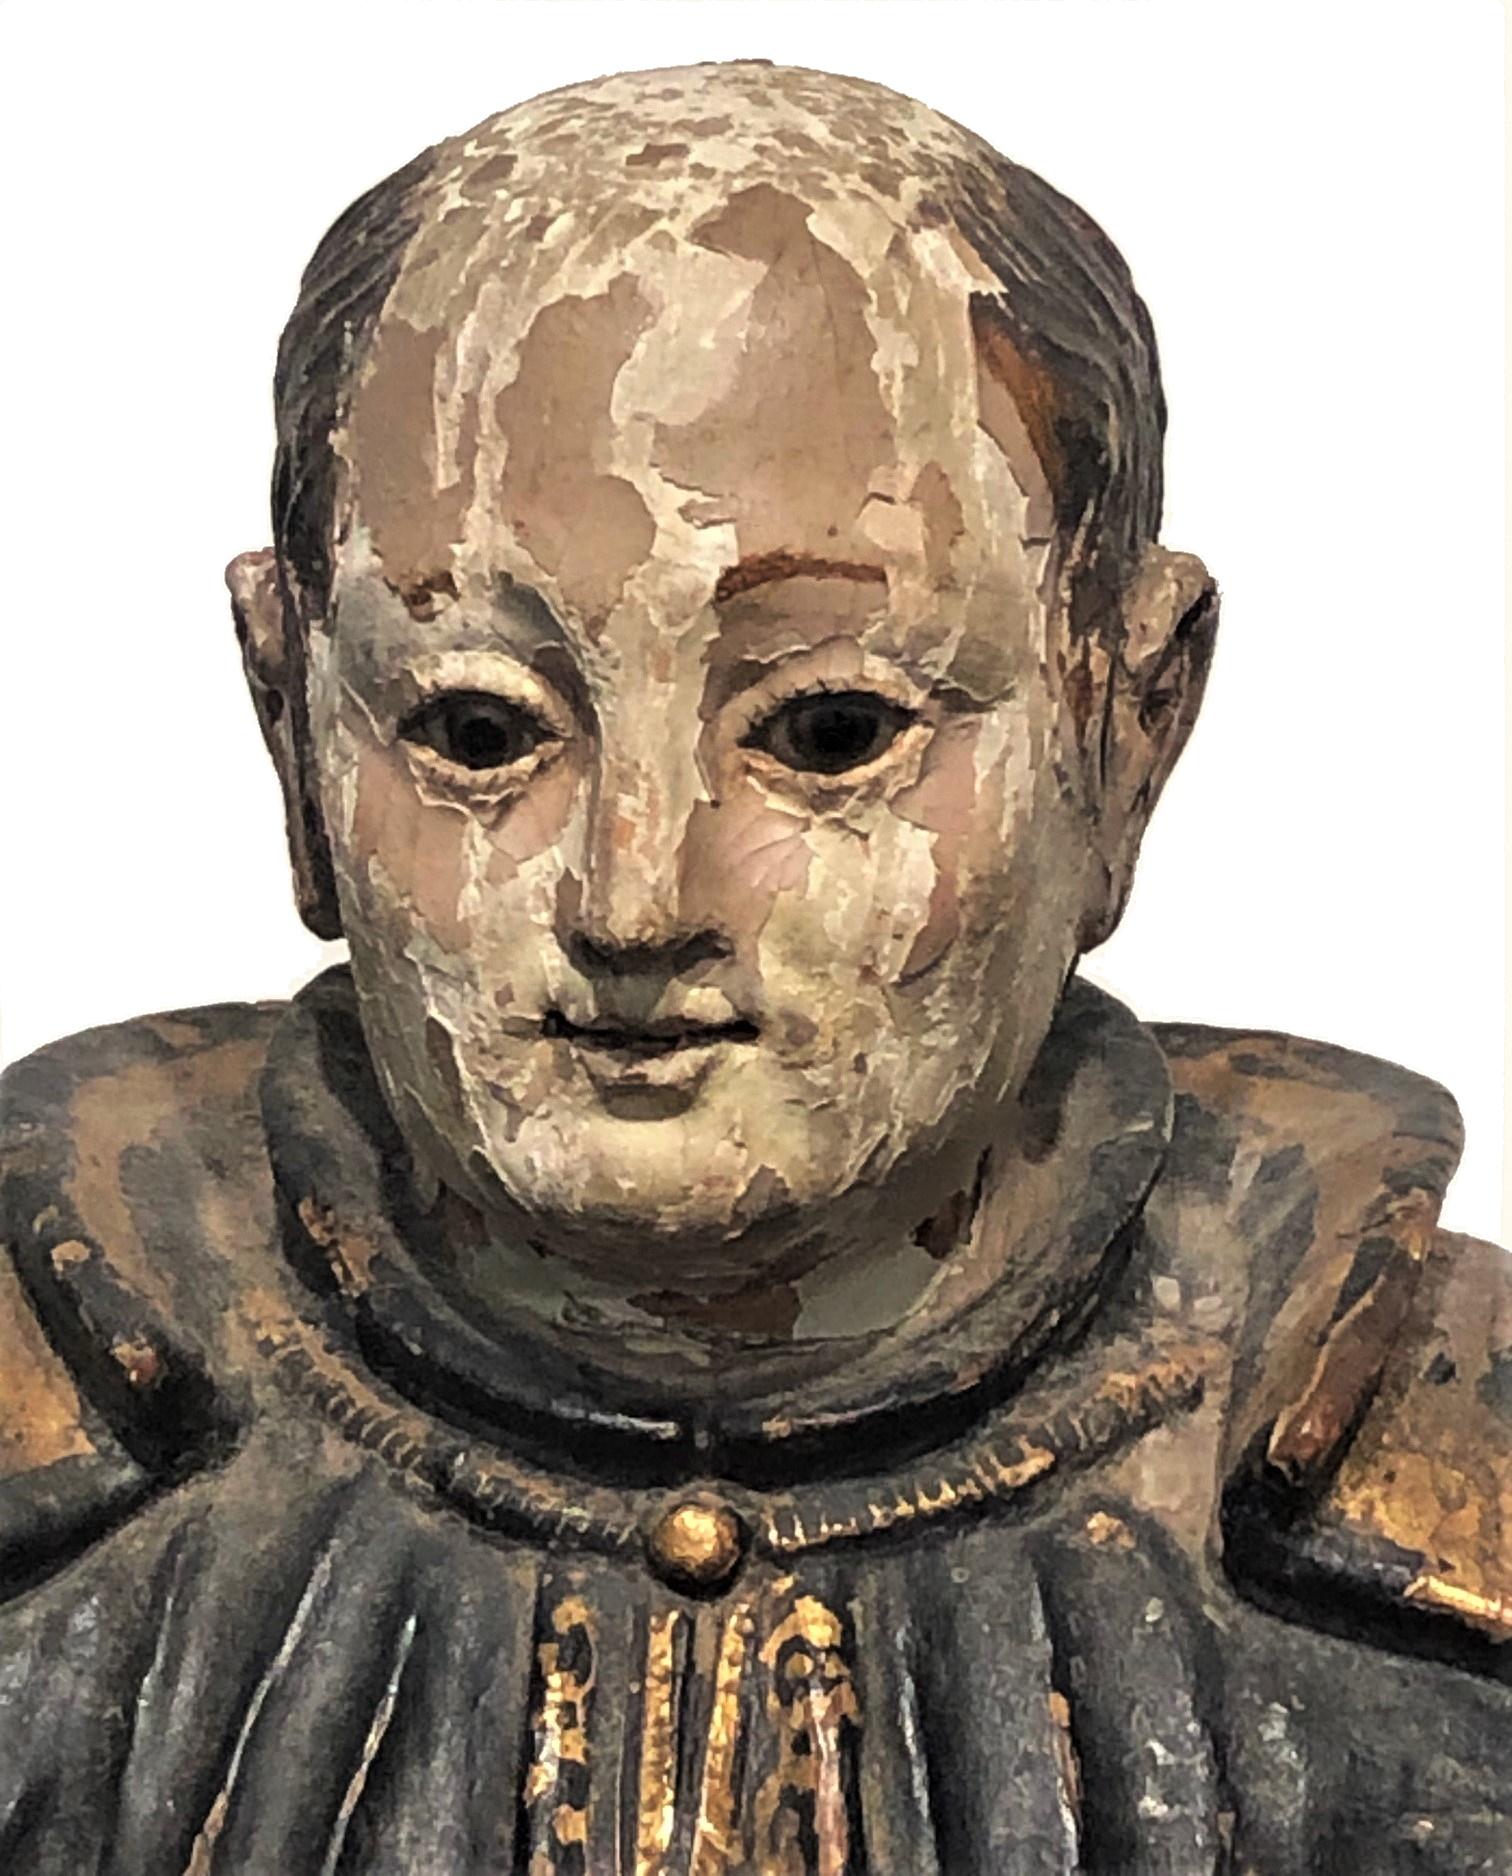 Baroque 
After Francisco Ruiz Gijon
Saint Francis of Assisi
Polychrome and Parcel Gilt Carved Wood, Insert Glass Eyes
Spain, Late 17th Century

Francisco Ruiz Gijón (Spanish, 1653 - 1720) was a renowned Spanish sculptor of the Baroque period. Born